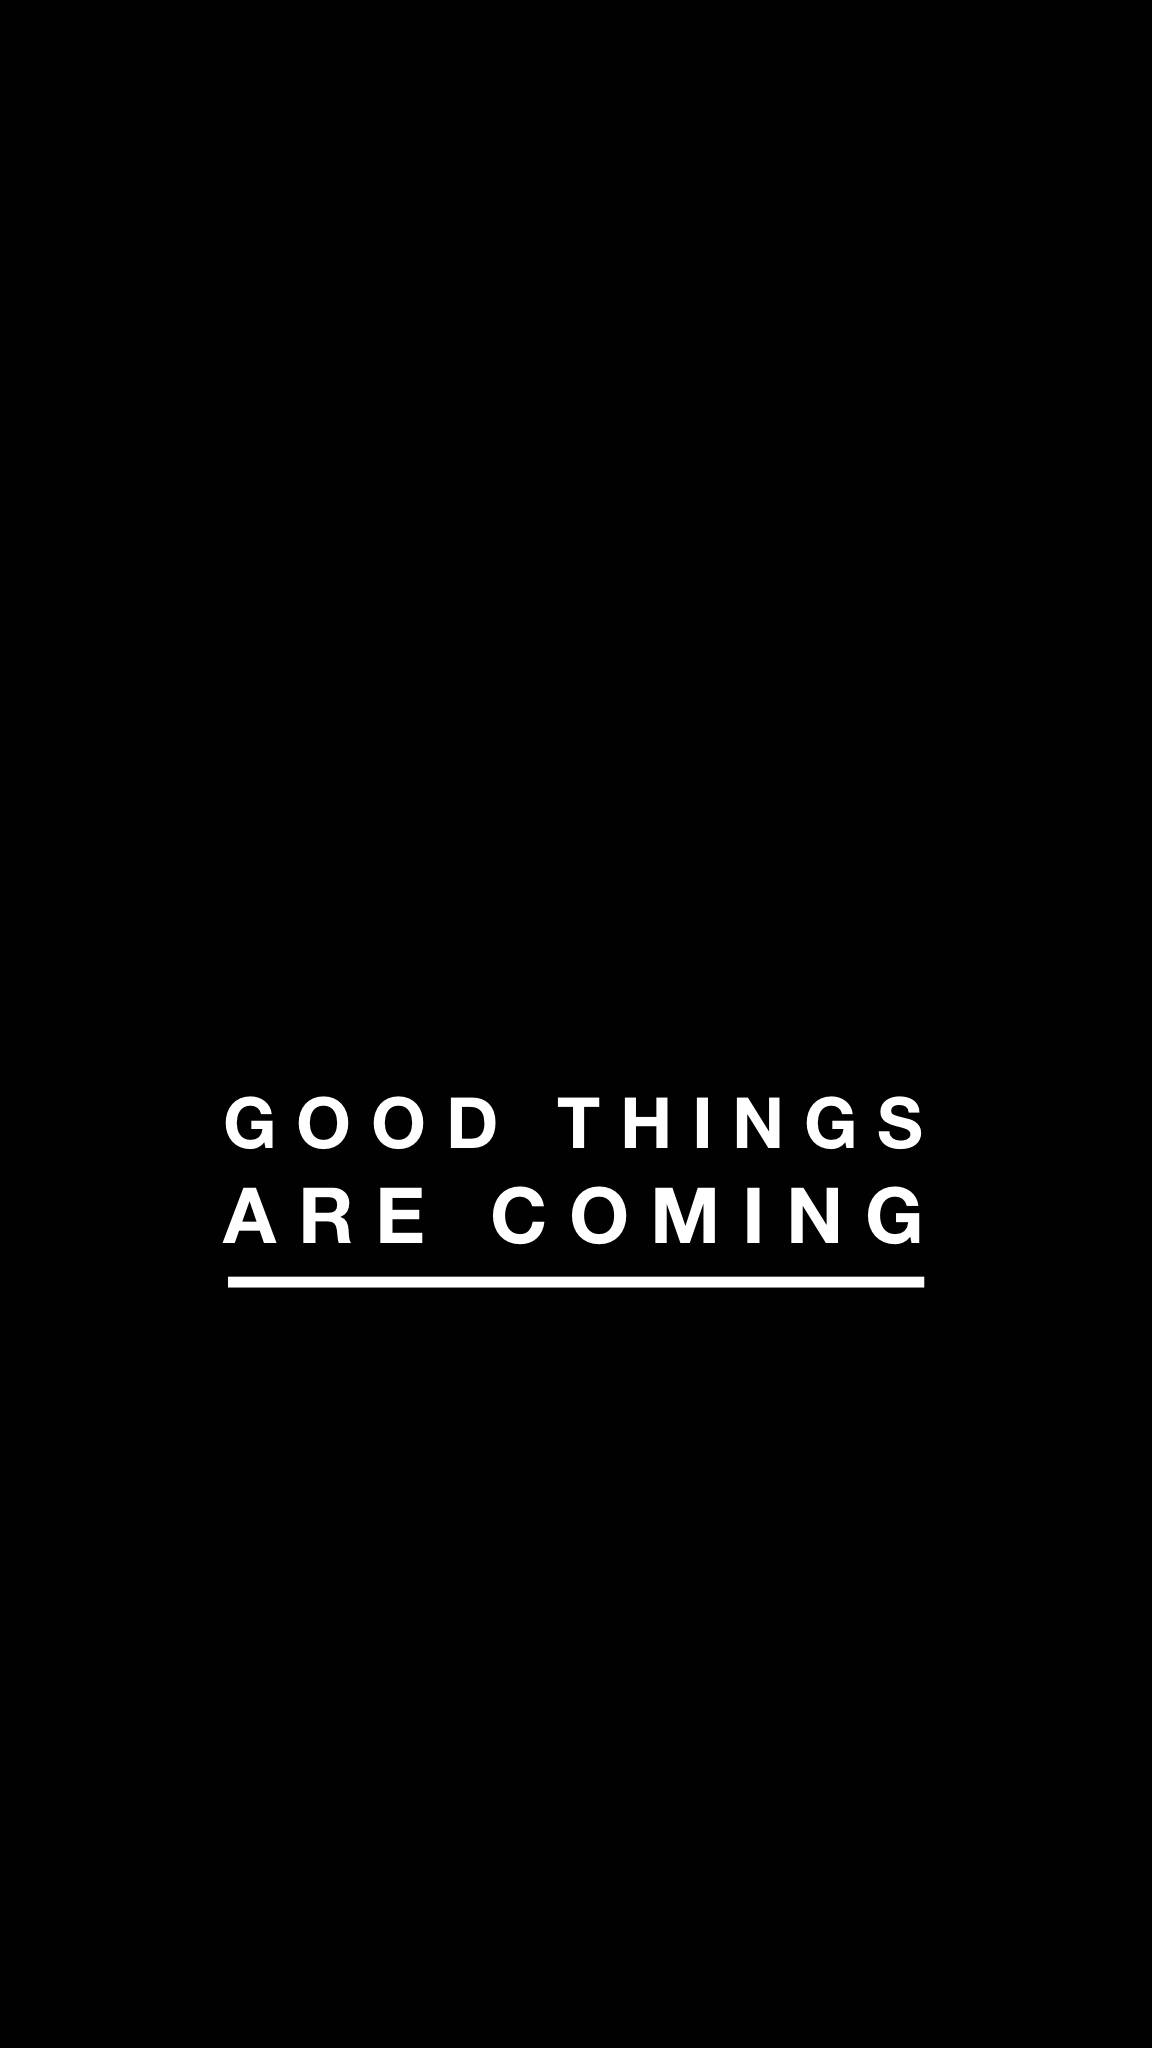 Good Things Are Coming Black And White Quotes Background